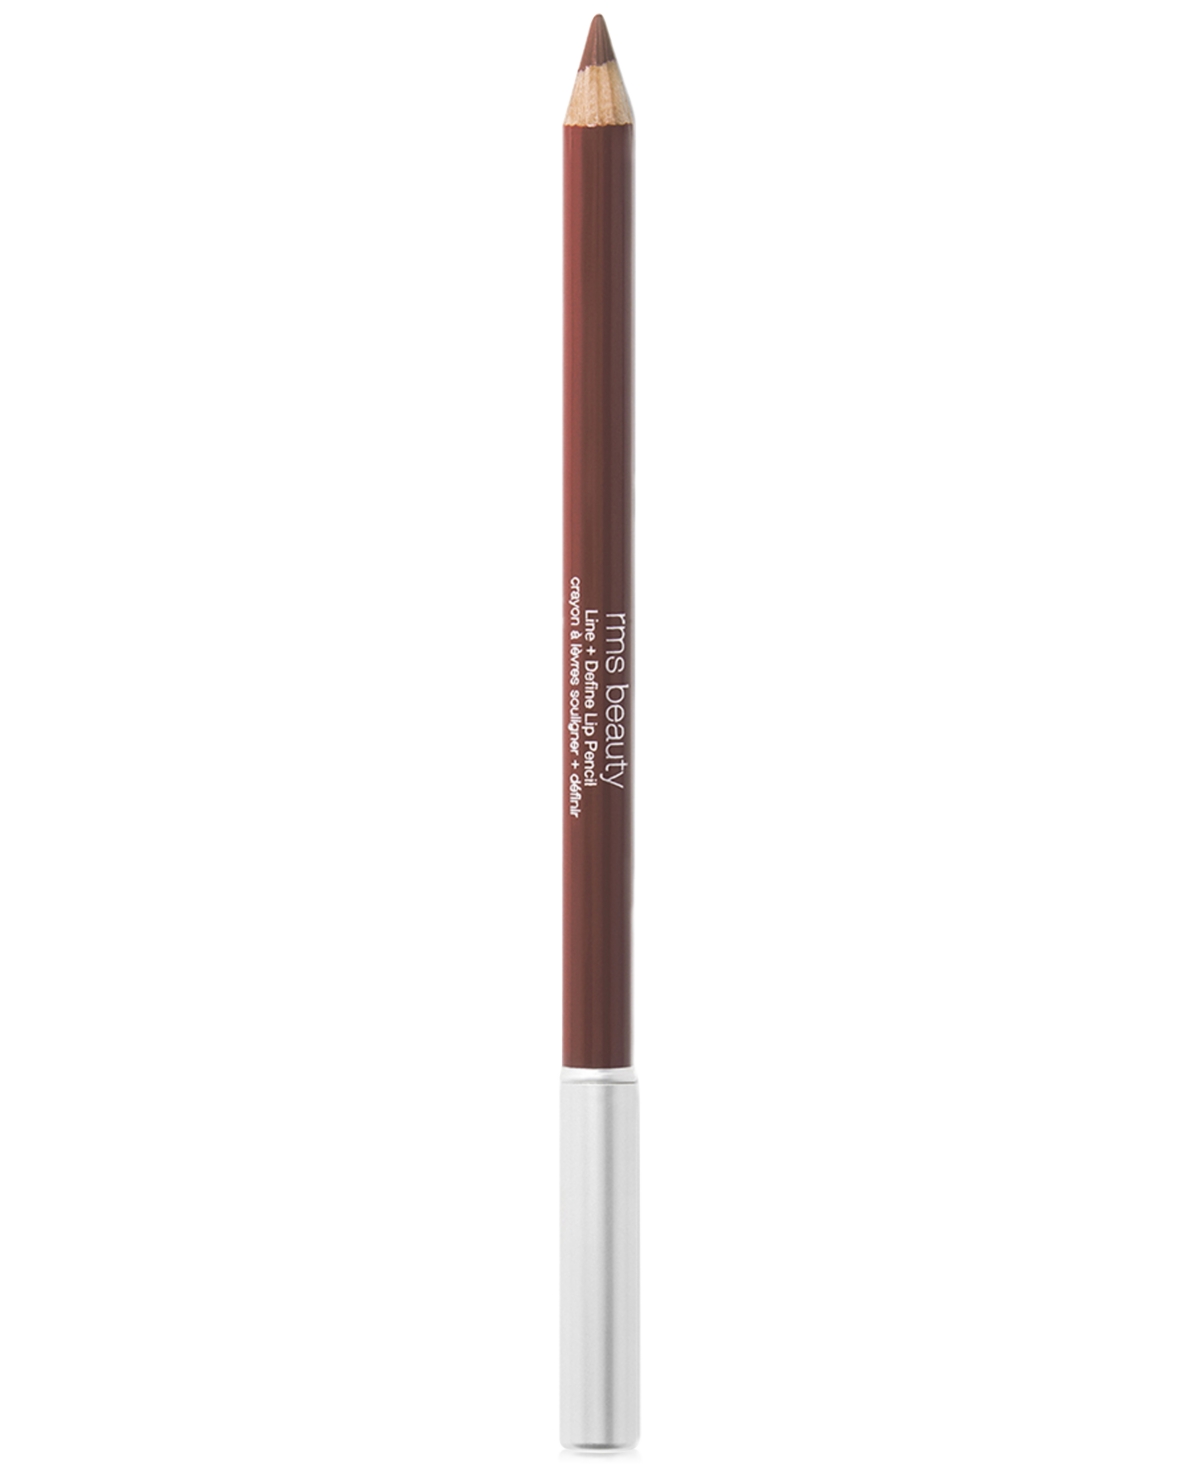 Rms Beauty Go Nude Lip Pencil In Midnight Nude